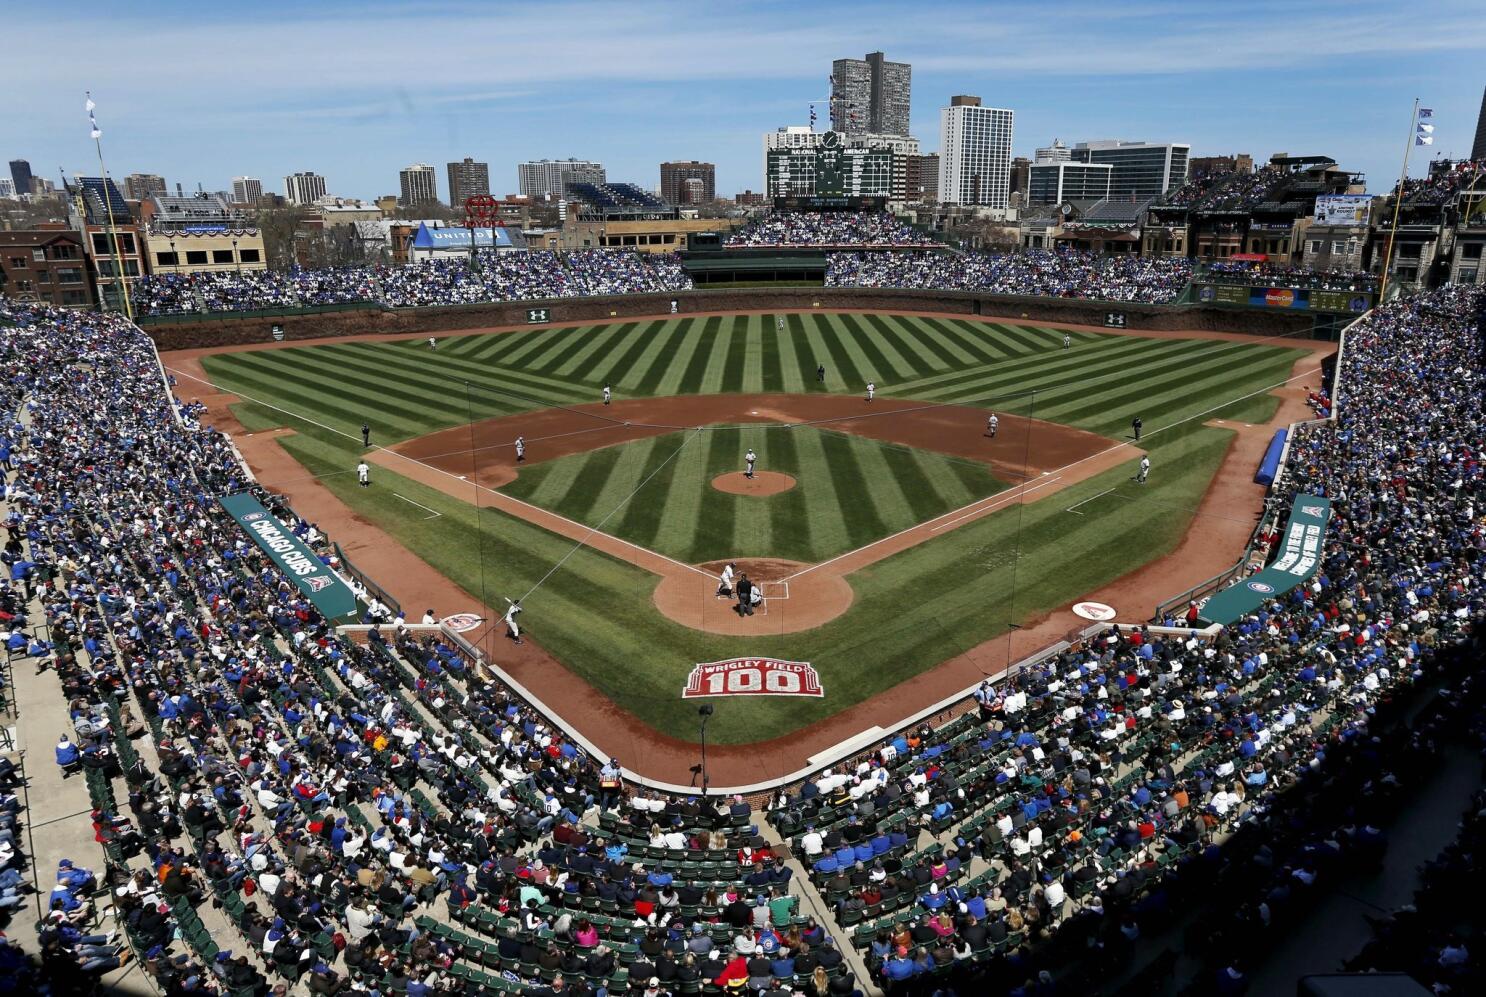 Did you know Wrigley Field's iconic ivy was inspired by the